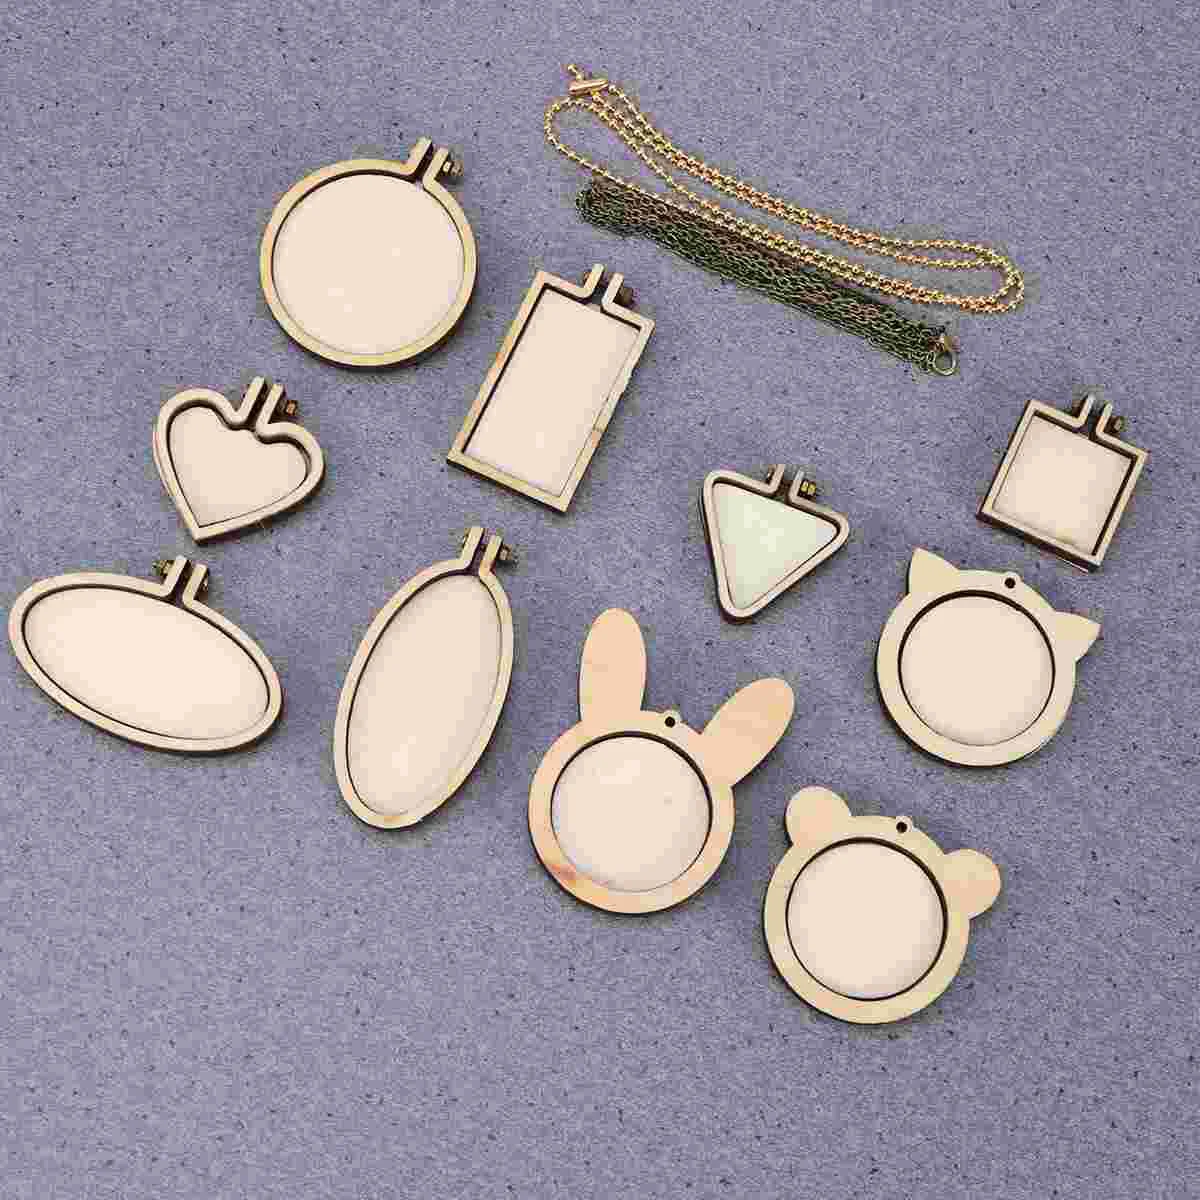 

12 Pcs Cross Stitch Fixing Frame Embroidery Mini Wood Hoops DIY Wooden Stitch for Crafting Sewing Stitching